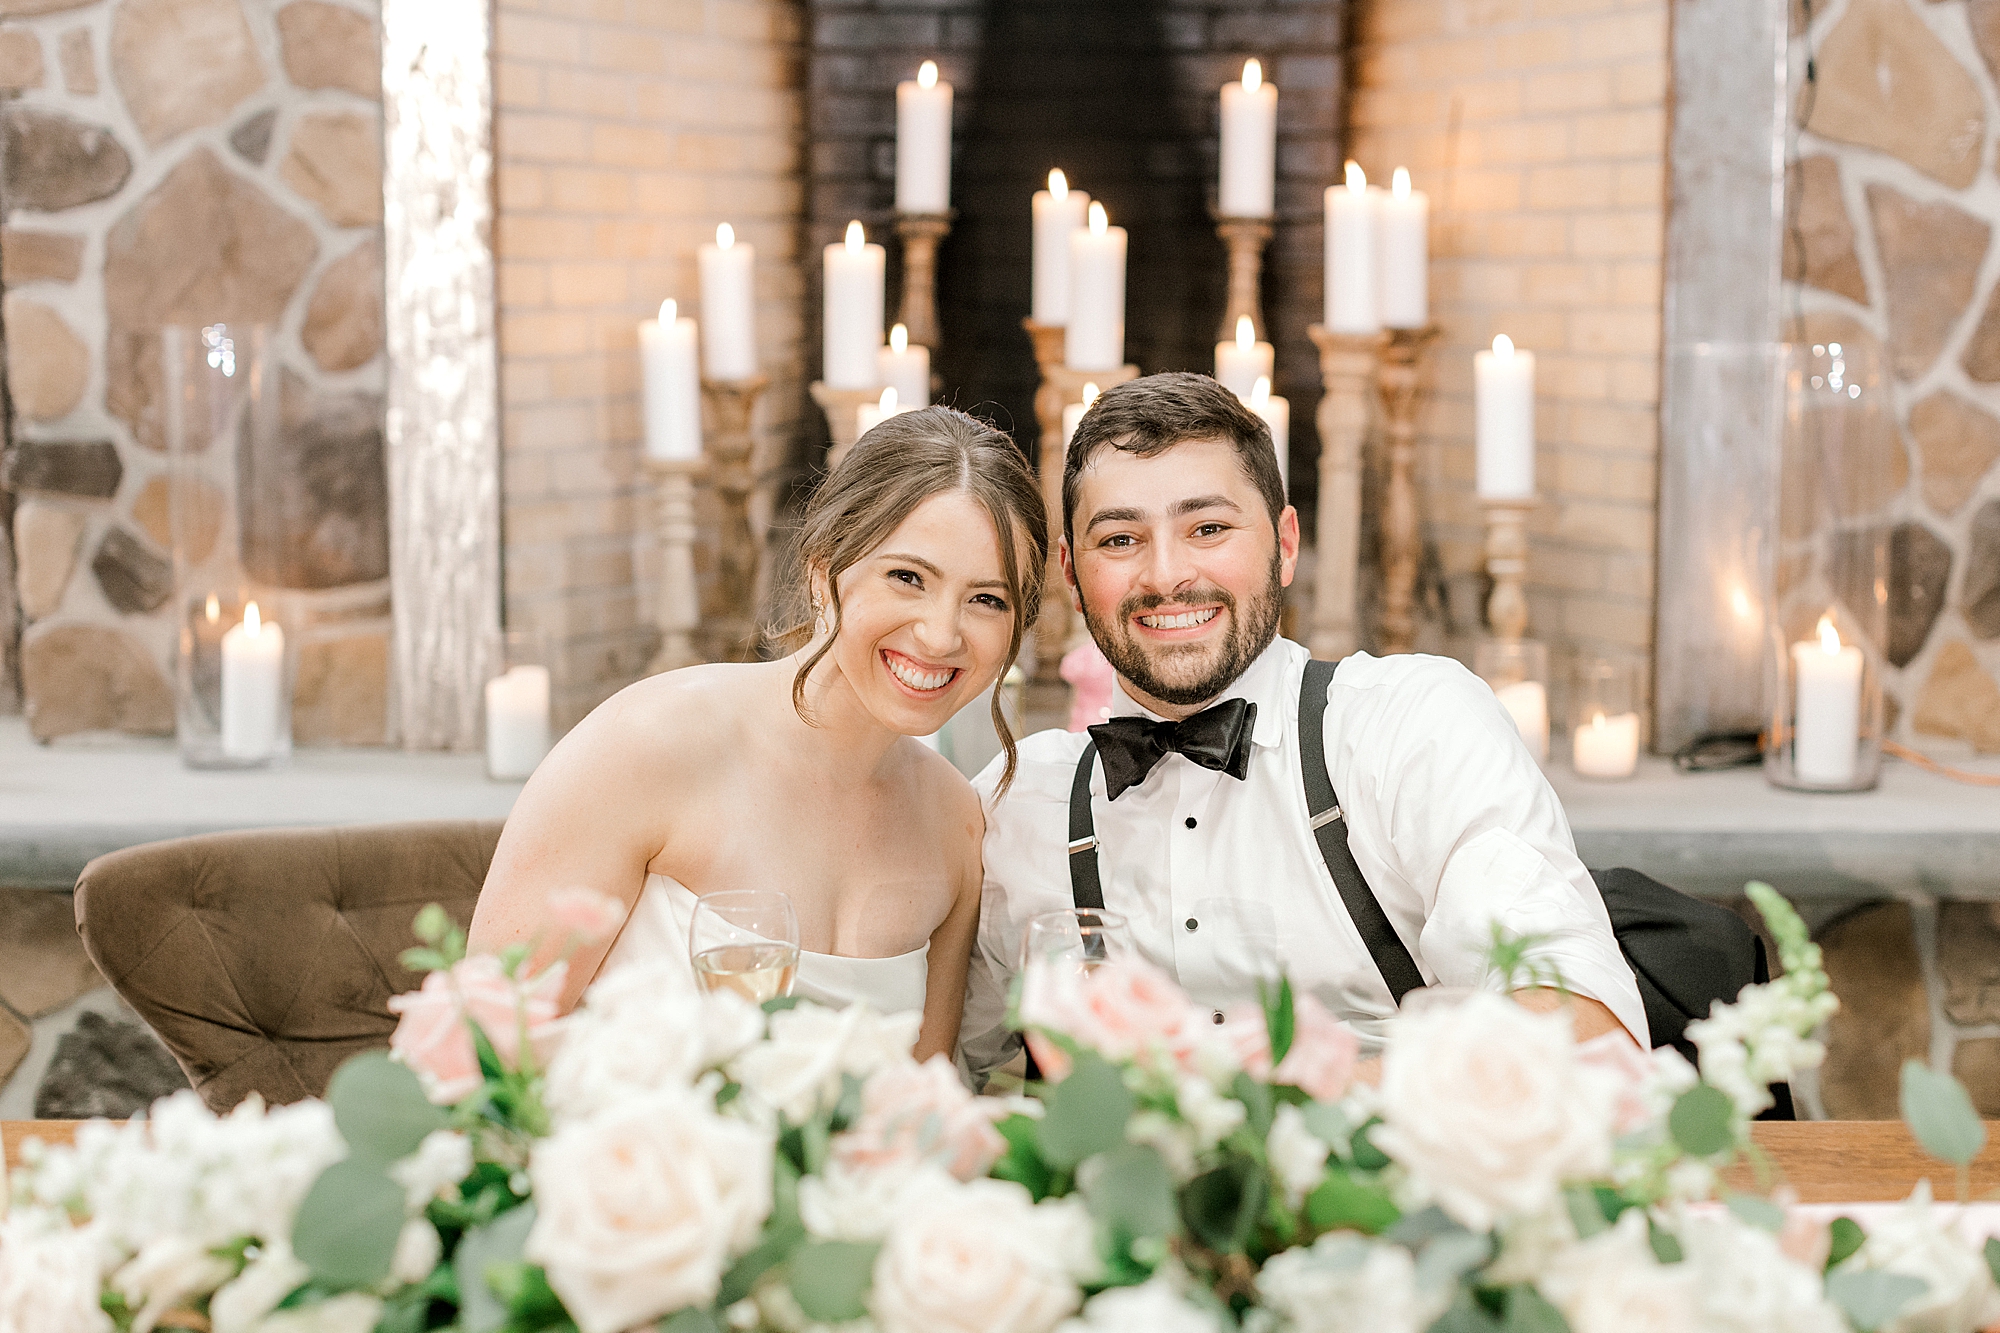 newlyweds sit together at sweetheart table in front of gold candlesticks